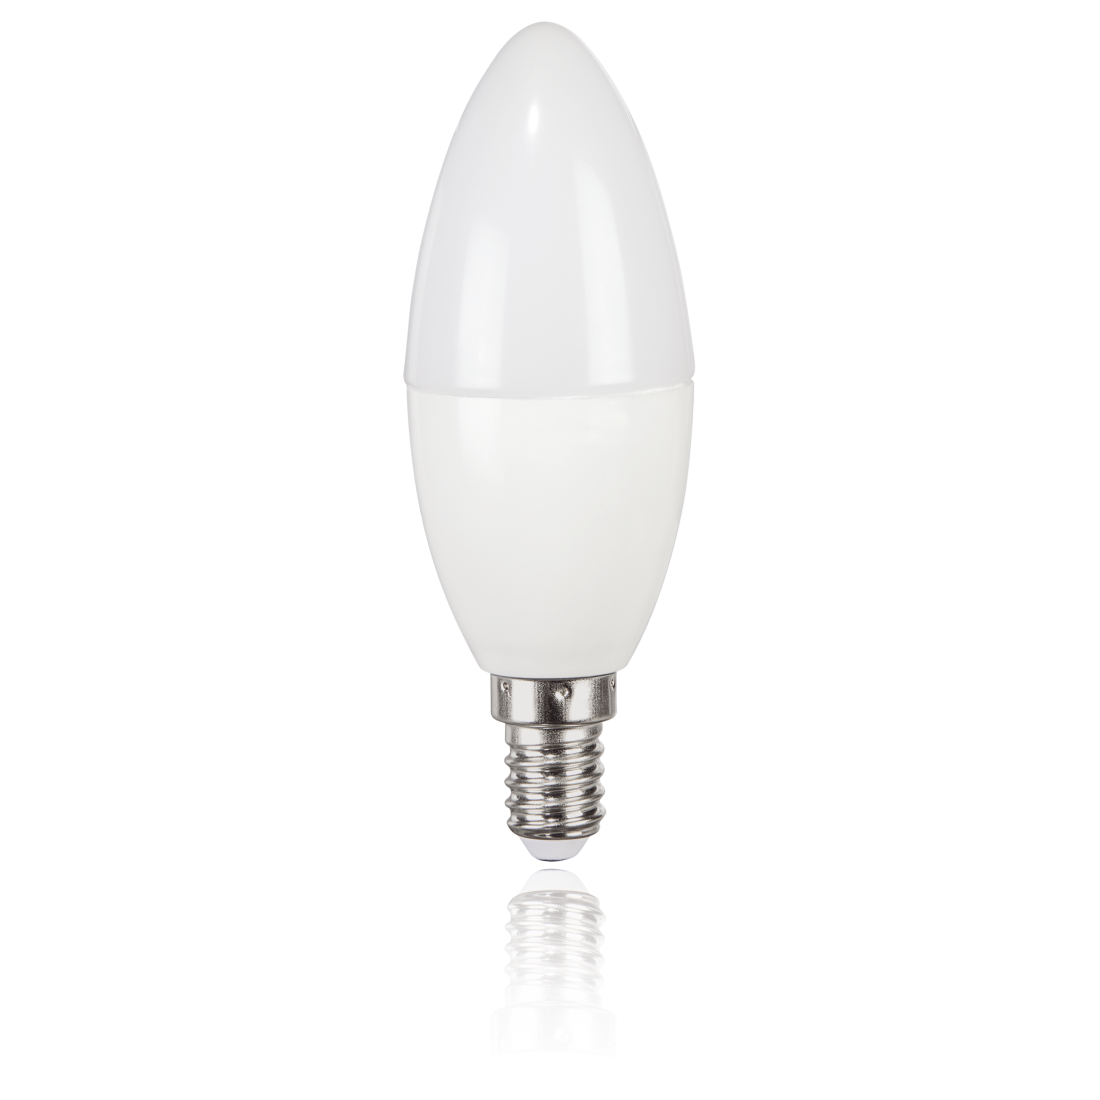 abx2 High-Res Image 2 - Xavax, LED Bulb, E14, 470 lm Replaces 40W, Candle Bulb, neutral white